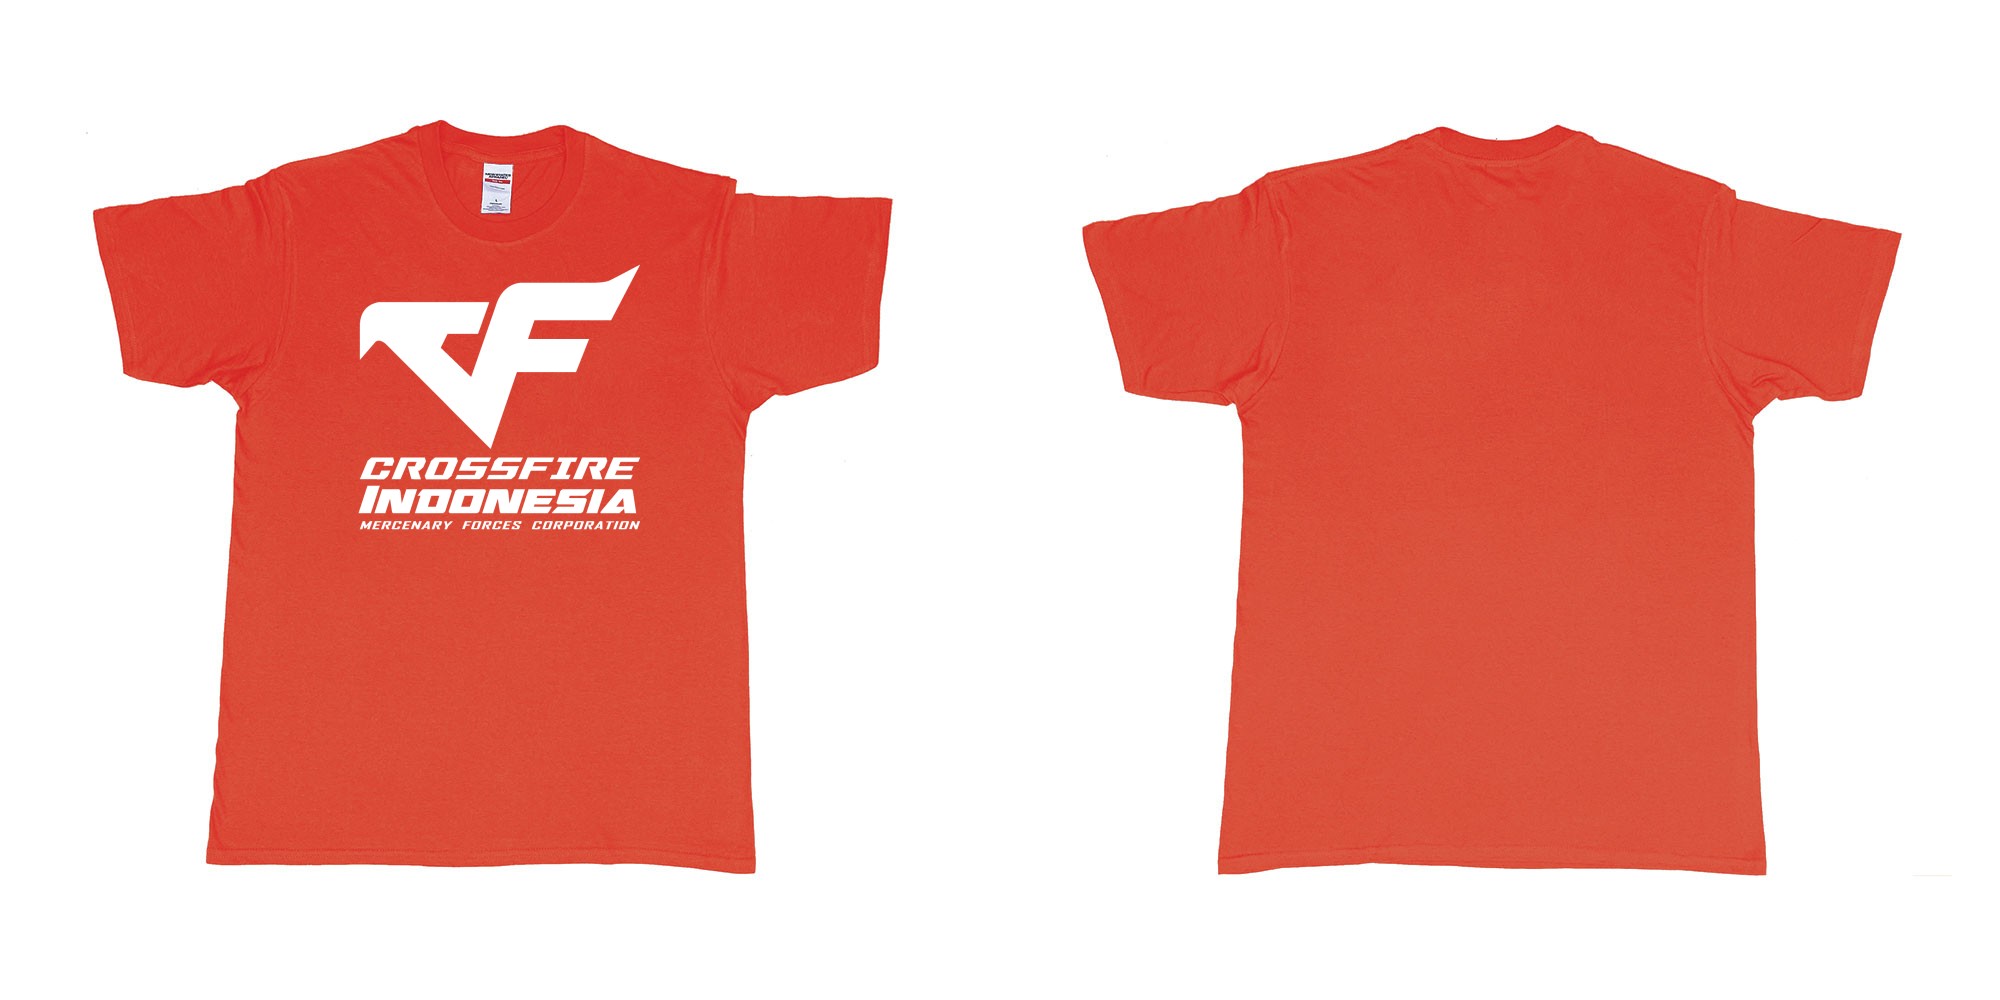 Custom tshirt design crossfire indonesia cfindo in fabric color red choice your own text made in Bali by The Pirate Way